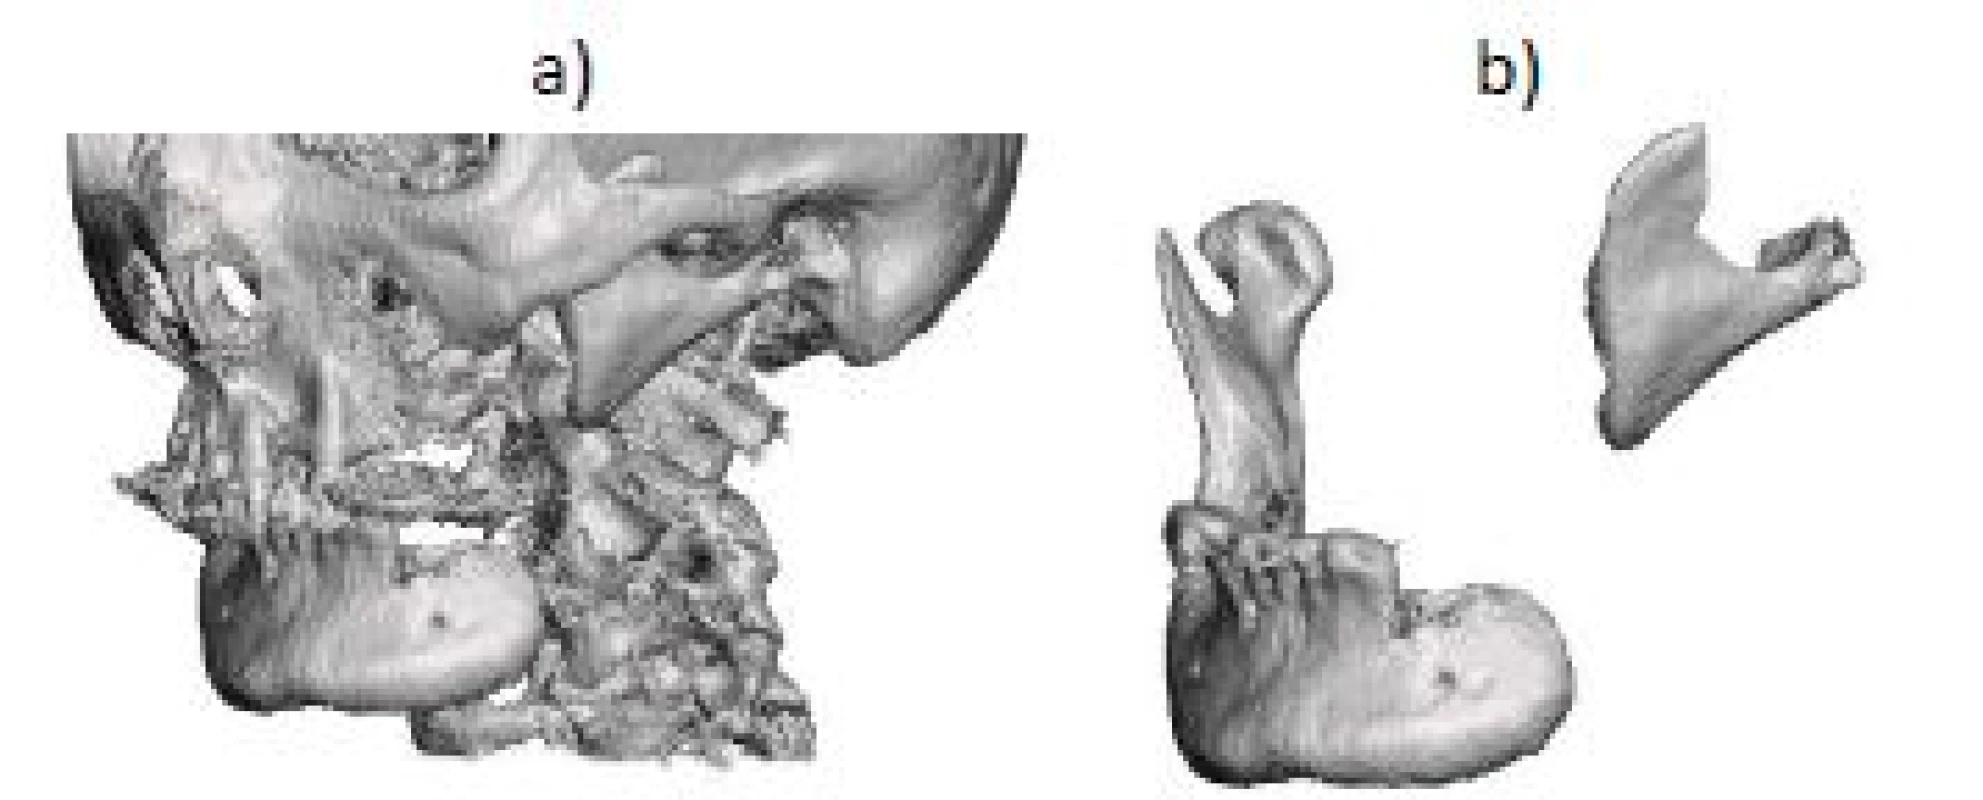 Showing a) reconstructed surface 3D model of the mandible and b) extracted 3D model of the mandibular defect.